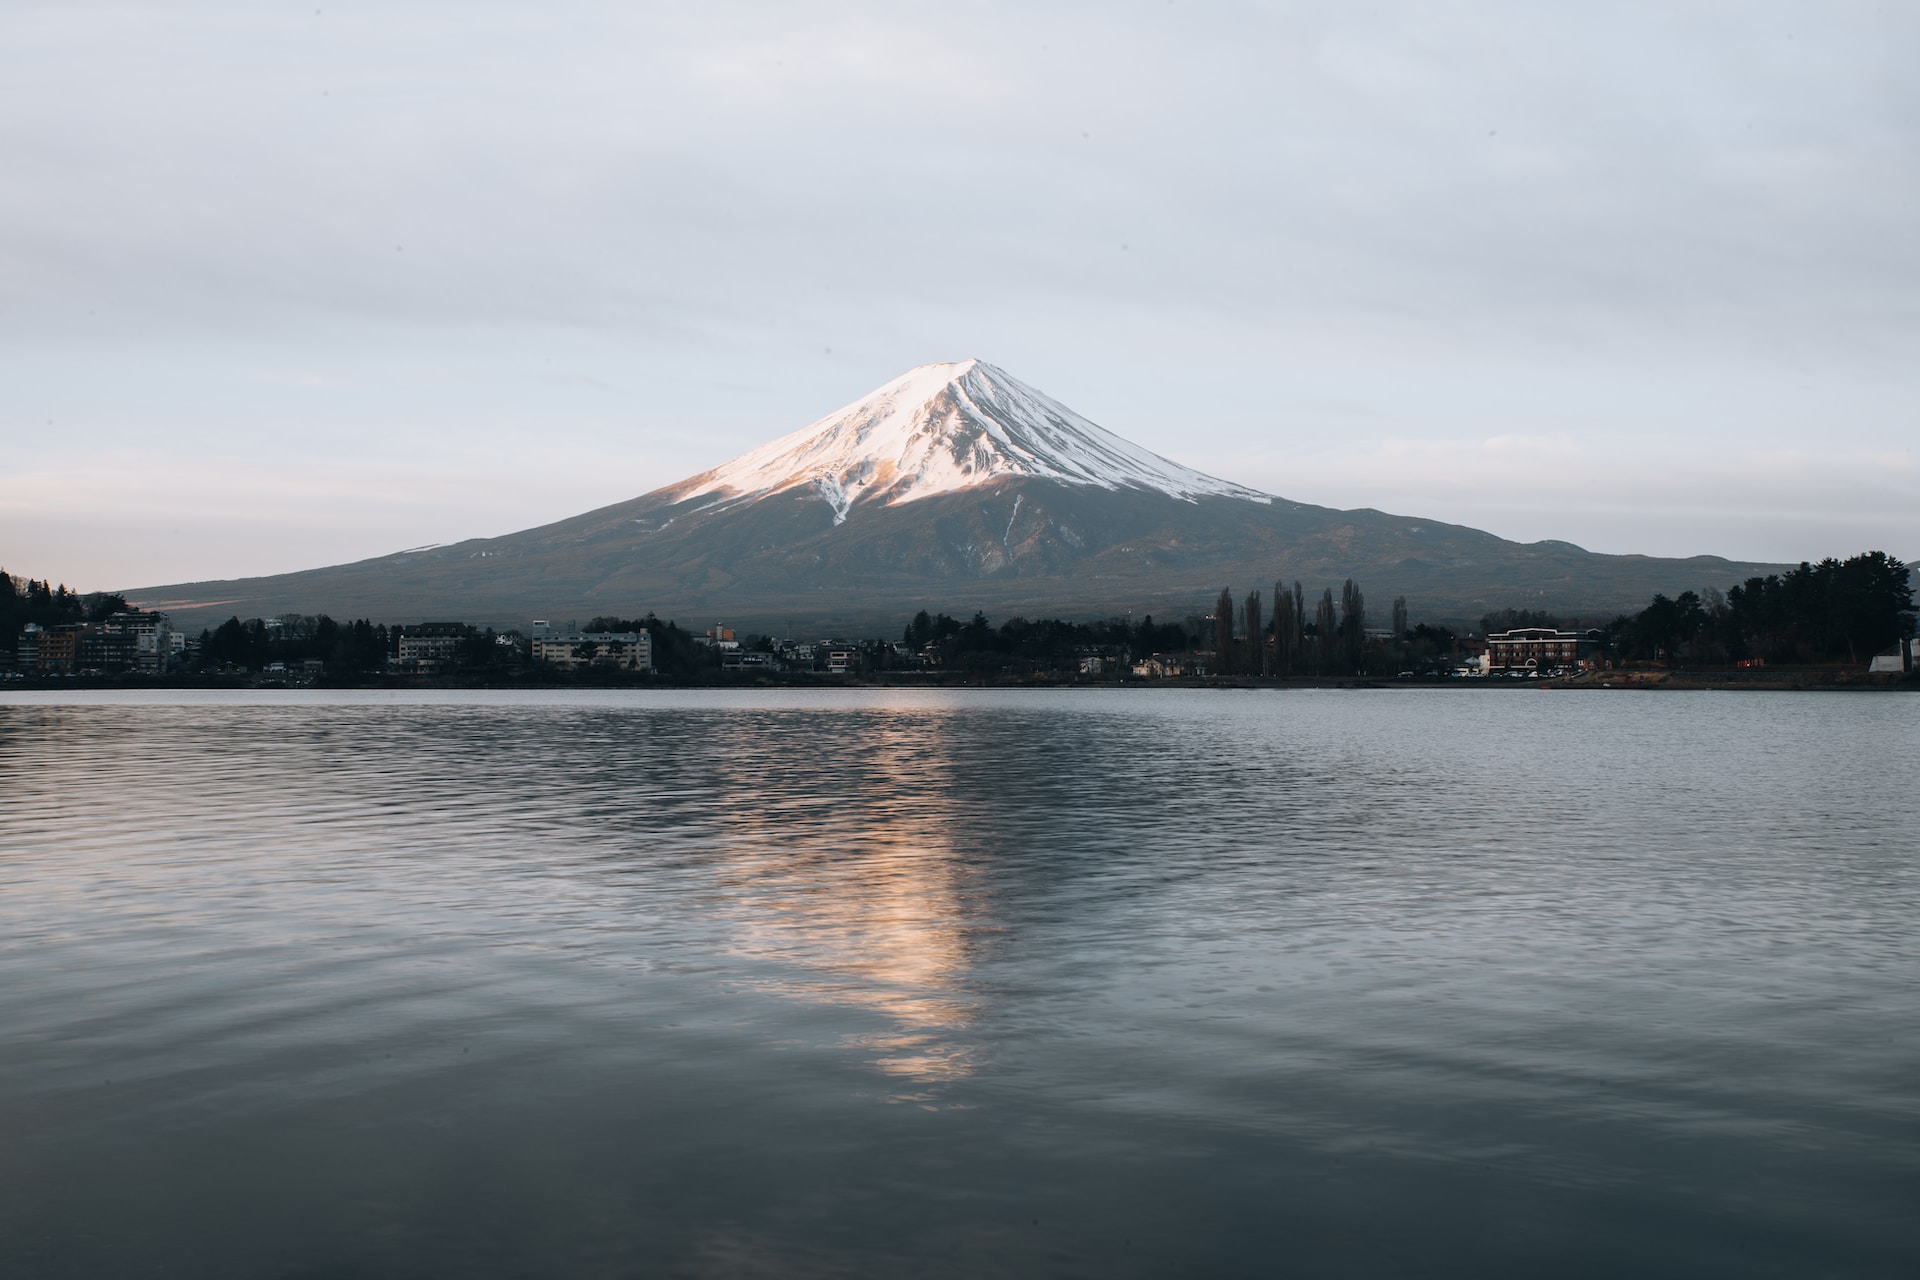 Mt. Fuji in Japan from across the water.